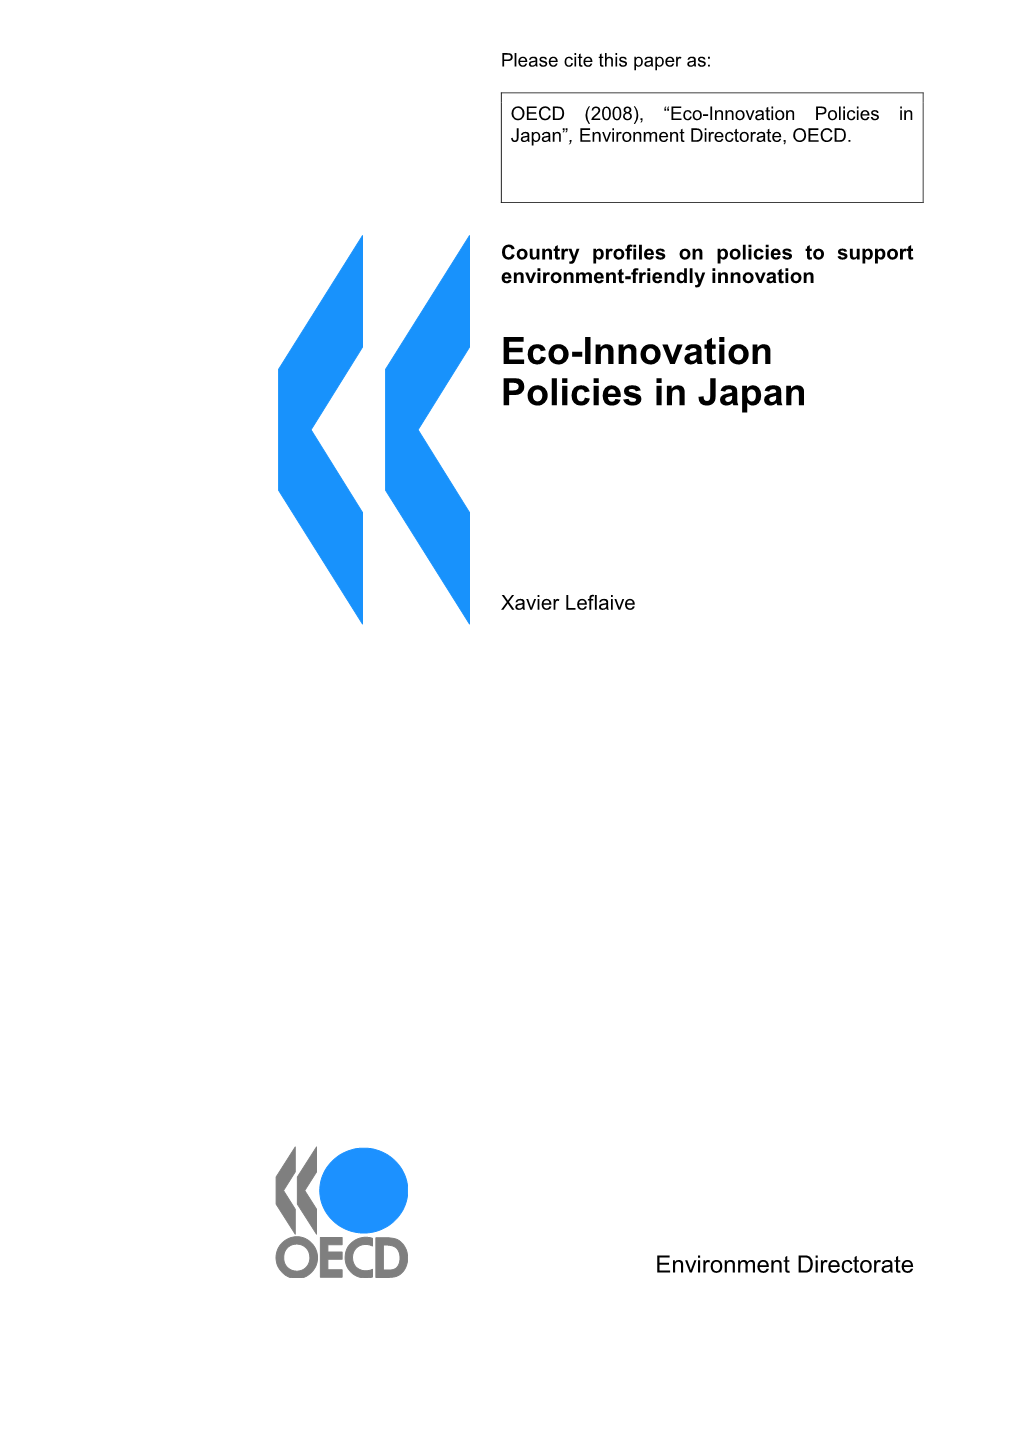 Eco-Innovation Policies in Japan‖, Environment Directorate, OECD